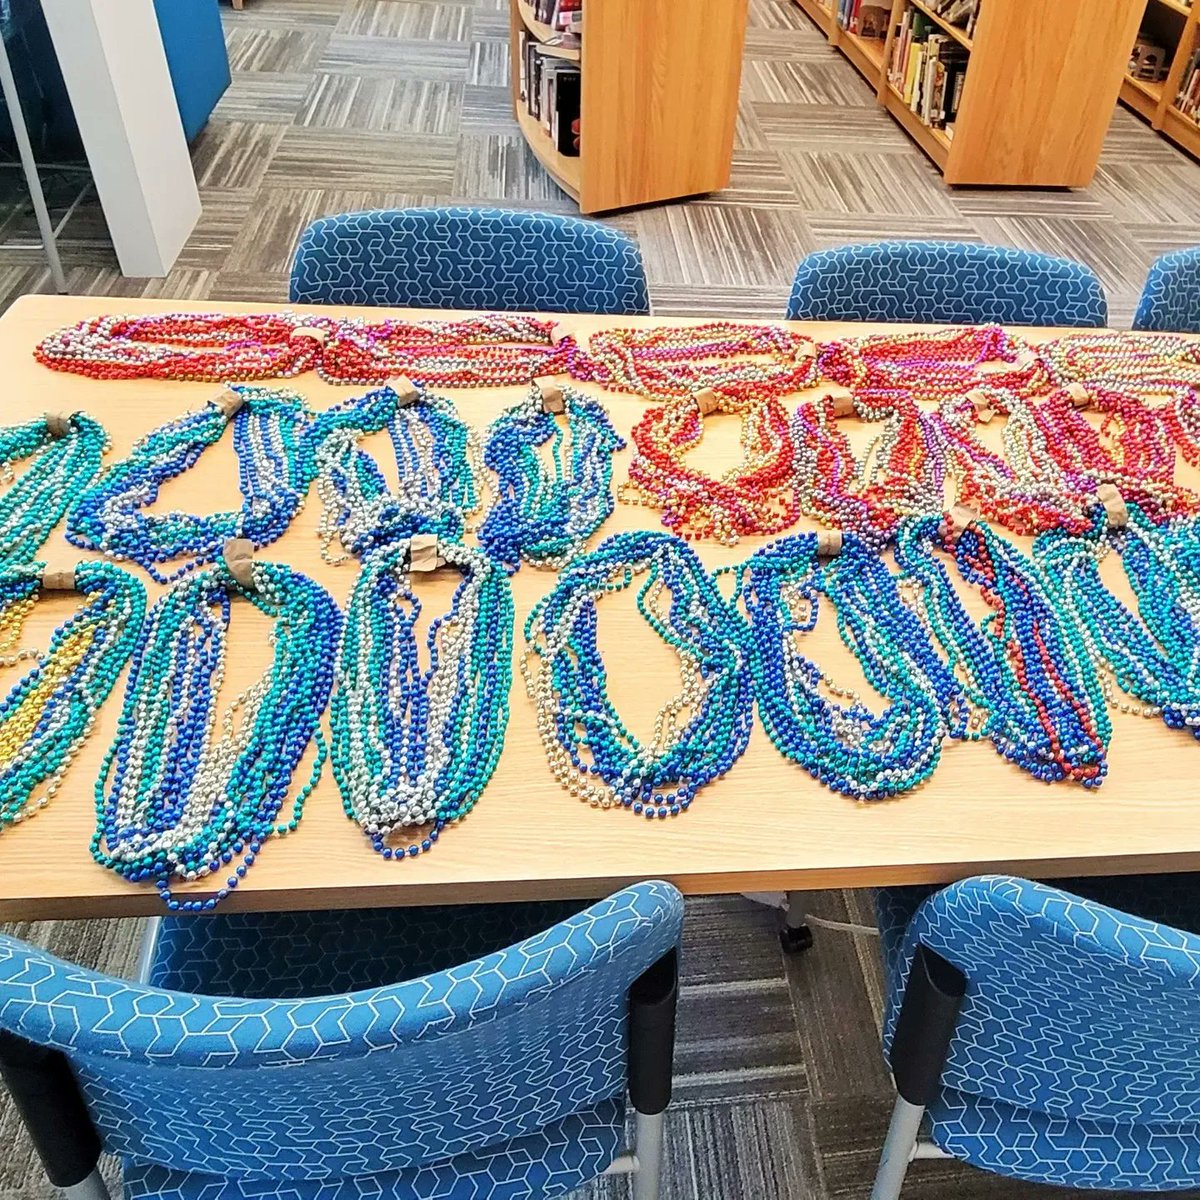 Happy Mardi Gras! Mr. Turner's throwing beads today so be sure and drop by the library to get yours! #hisdlibrariesnow #hisdlibraries @HisdKids @HISDChoice @HISDLibraryServ #whatwouldbaldlibrarianread #wwblr #beads